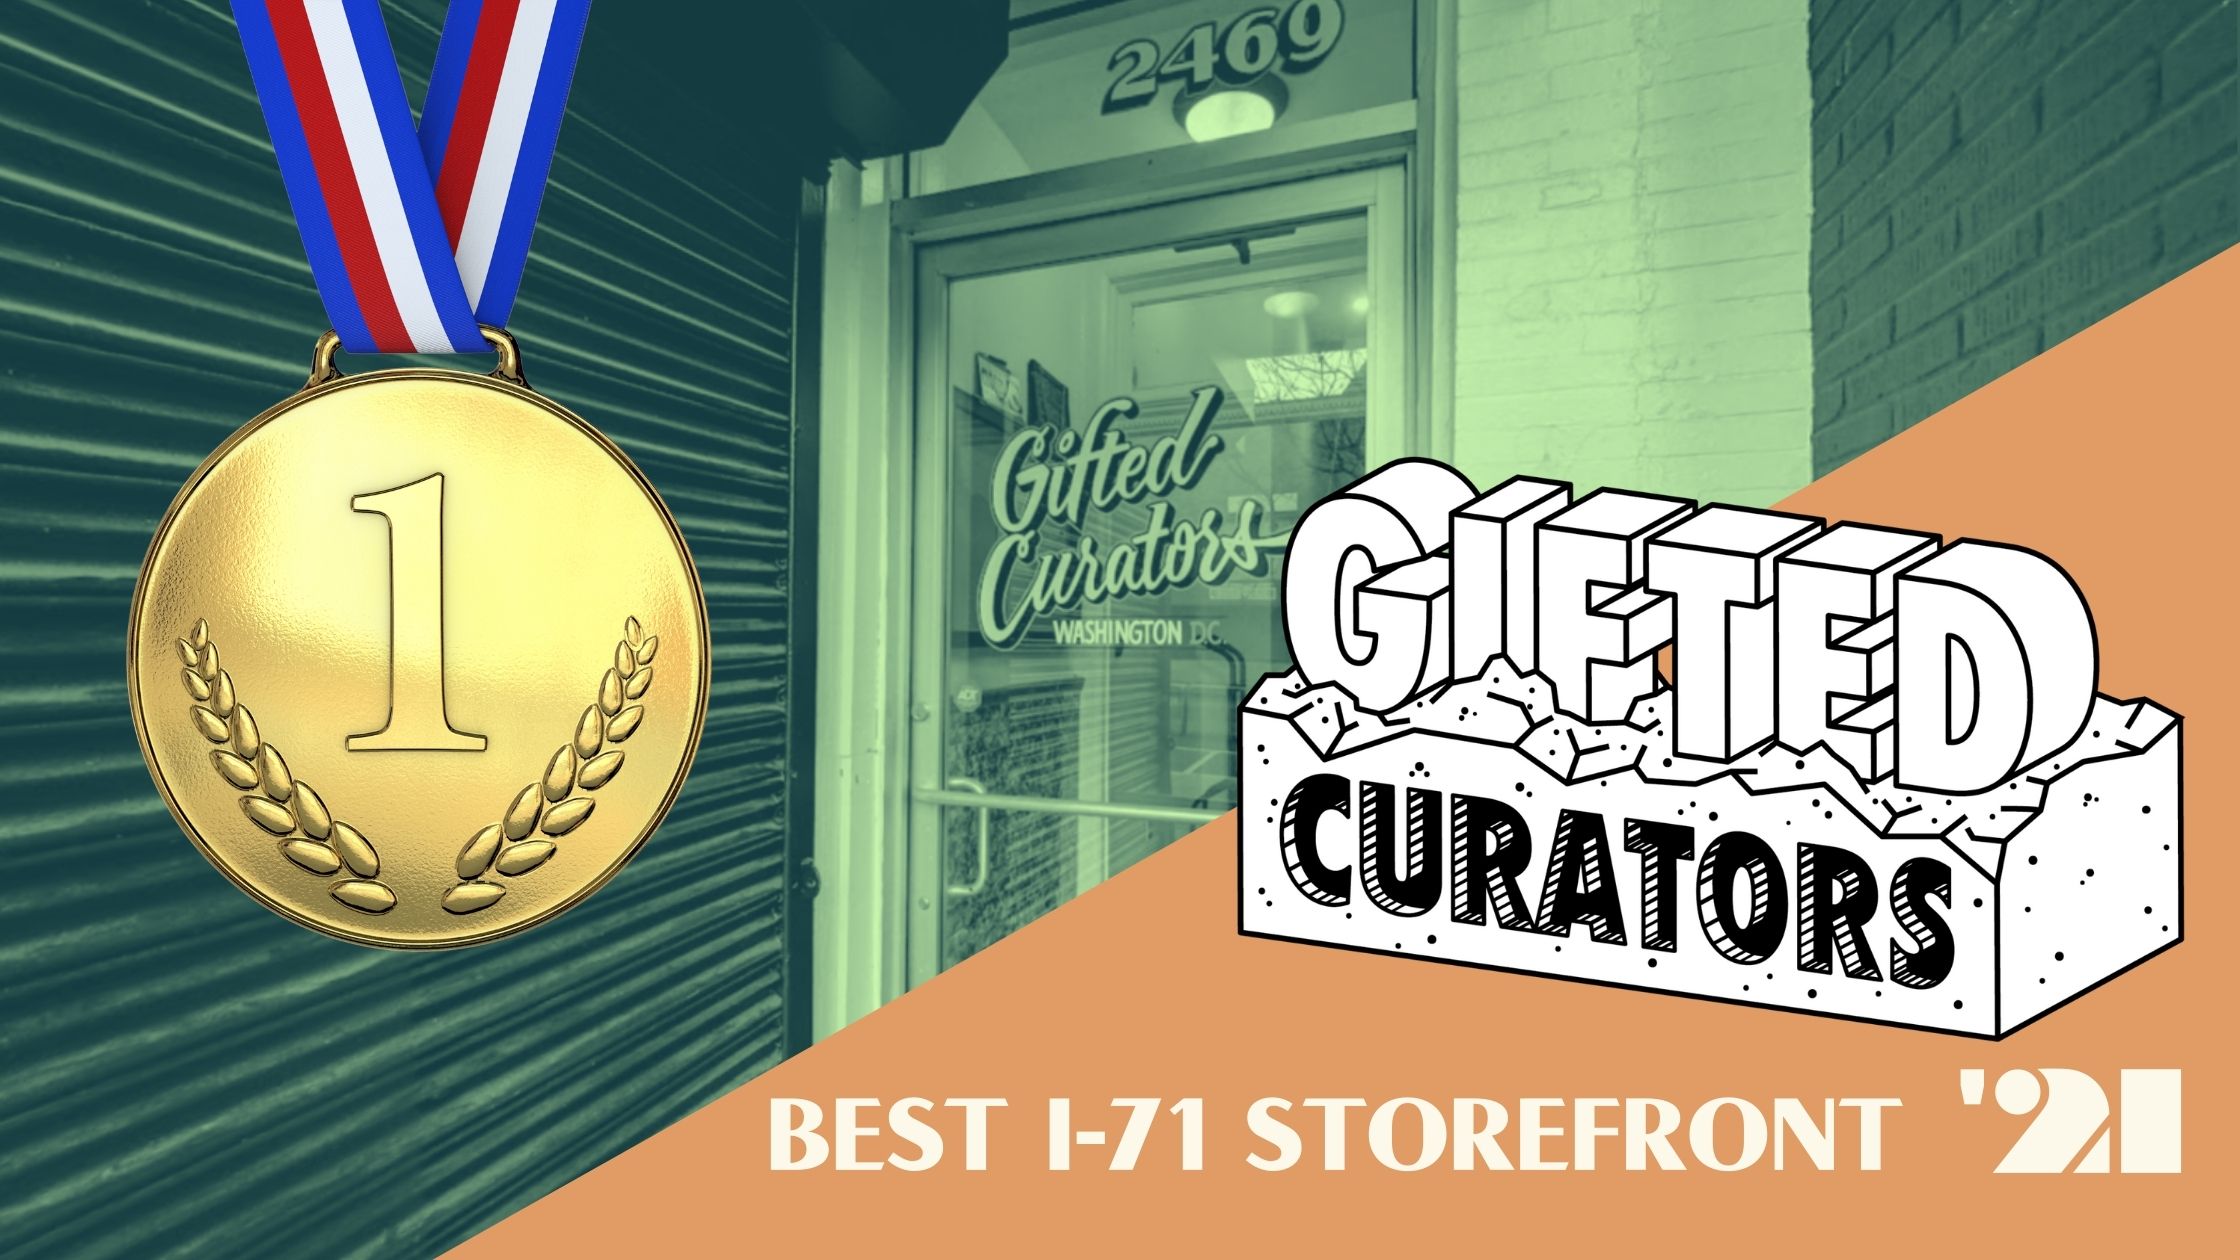 Best storefront 2021 gifted curators